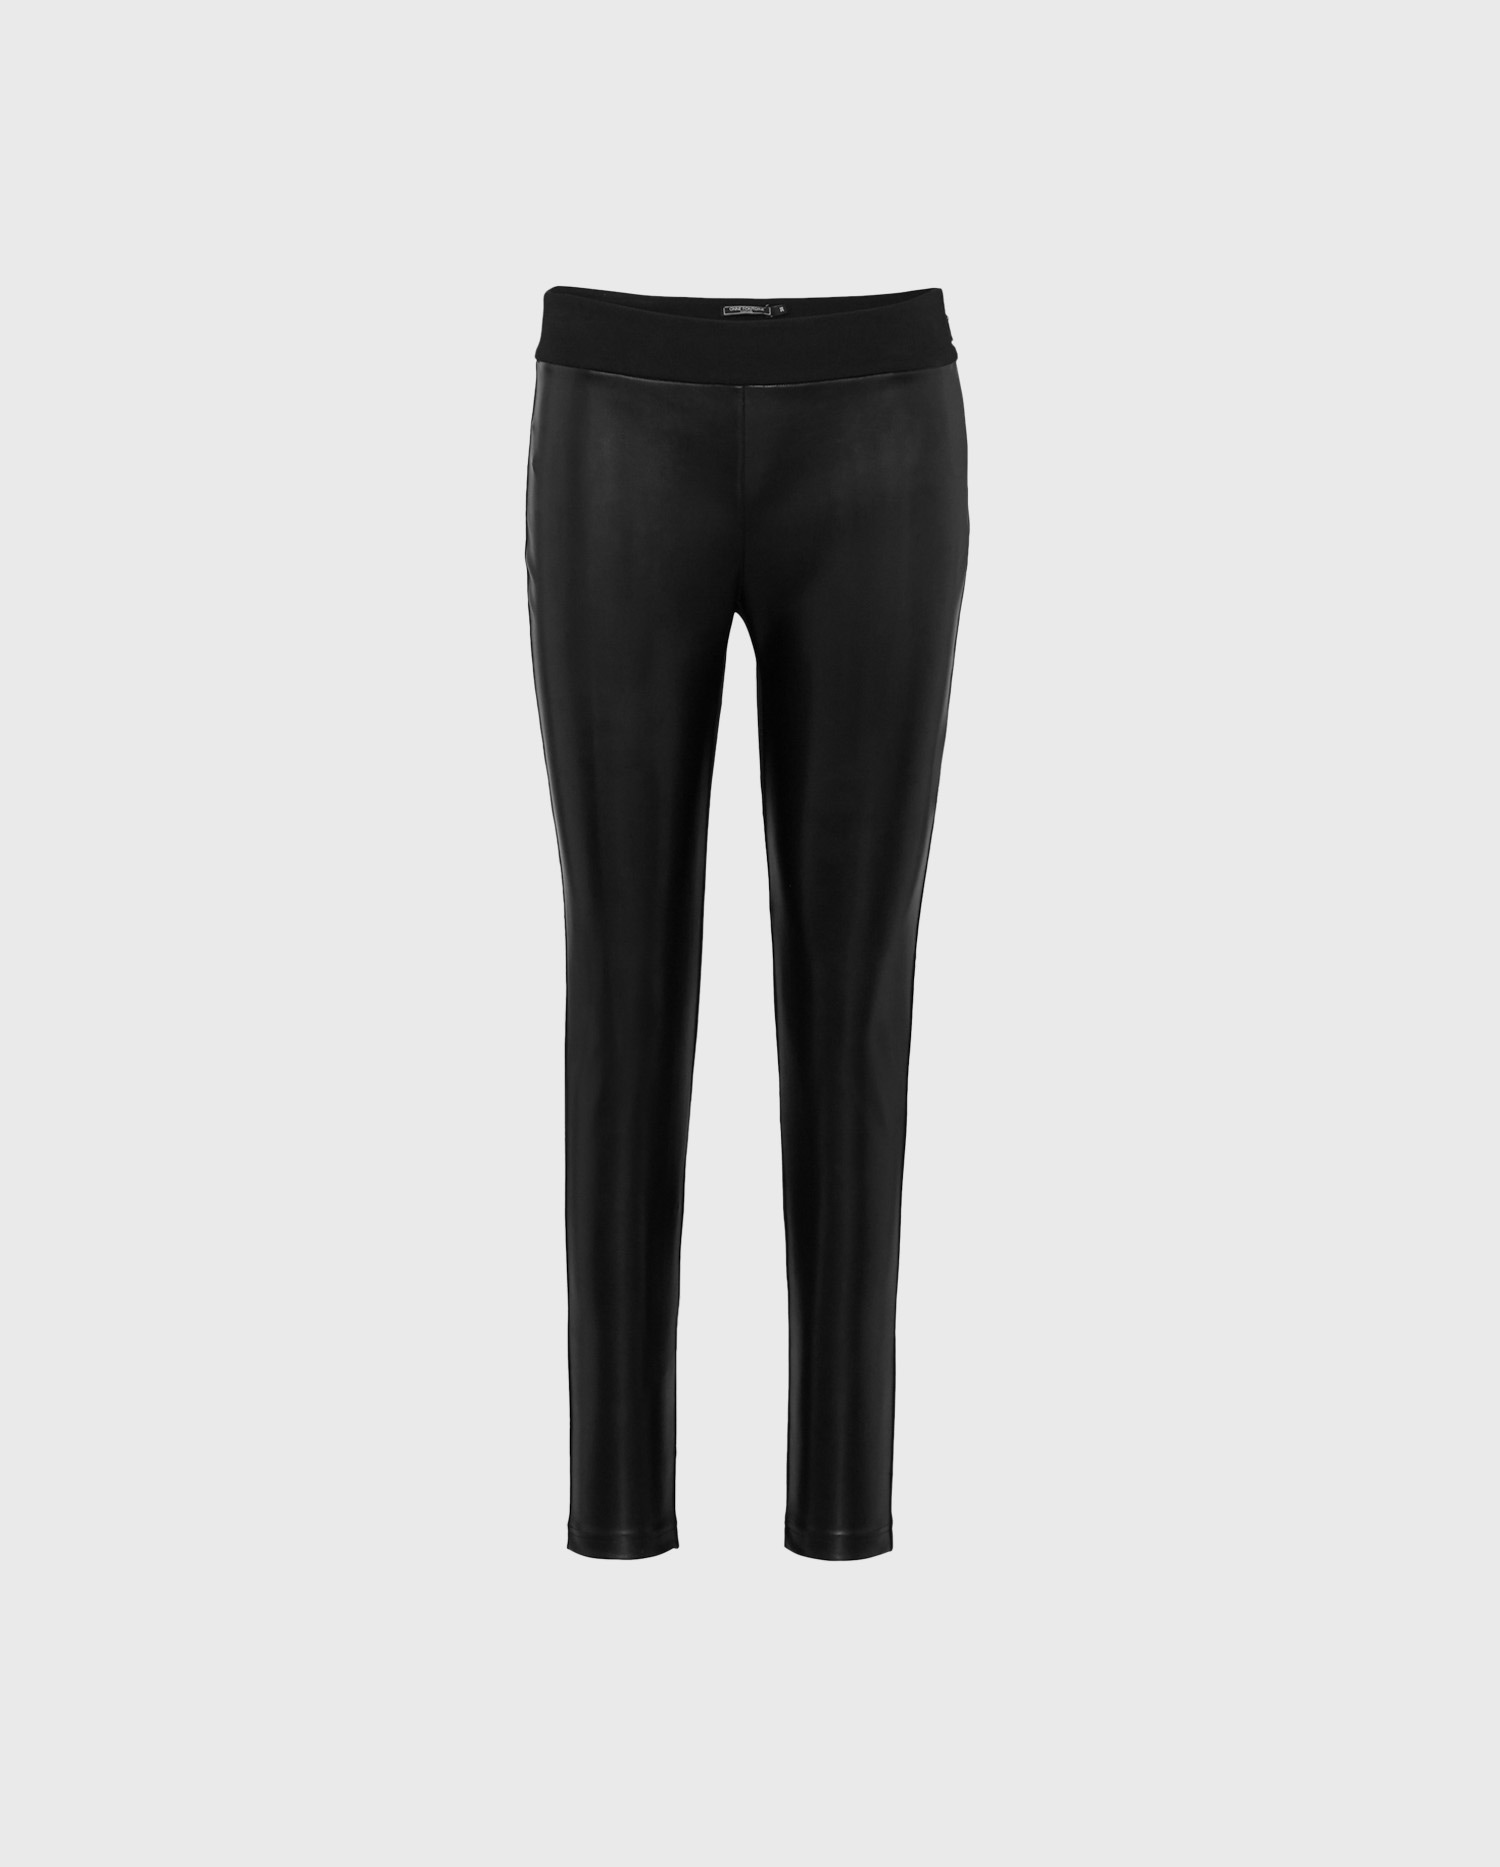 Discover the FANDY black Faux leather legging from ANNE FONTAINE